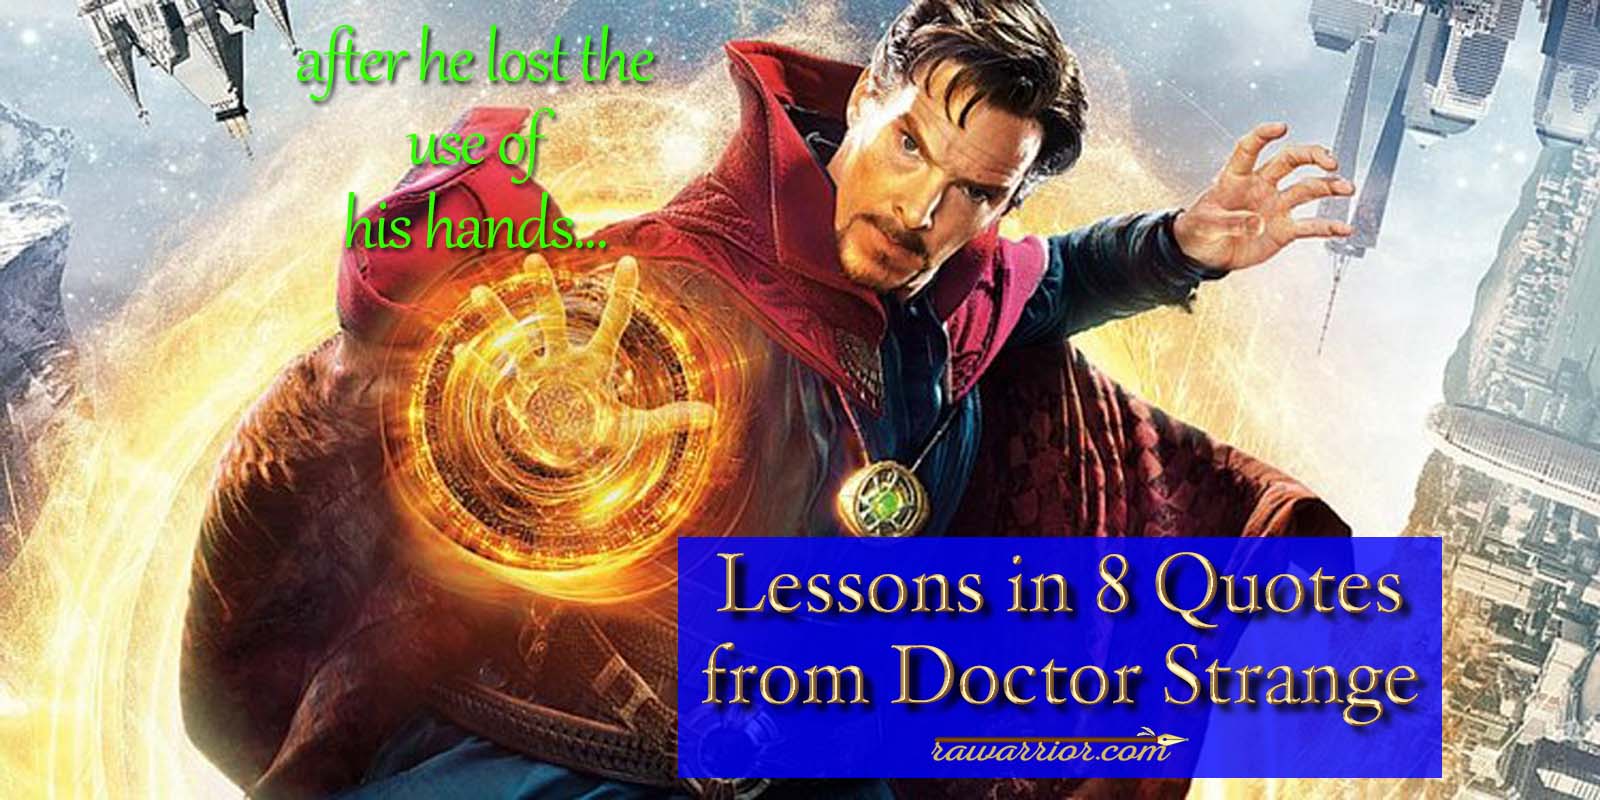 Lessons in 8 Quotes from Doctor Strange